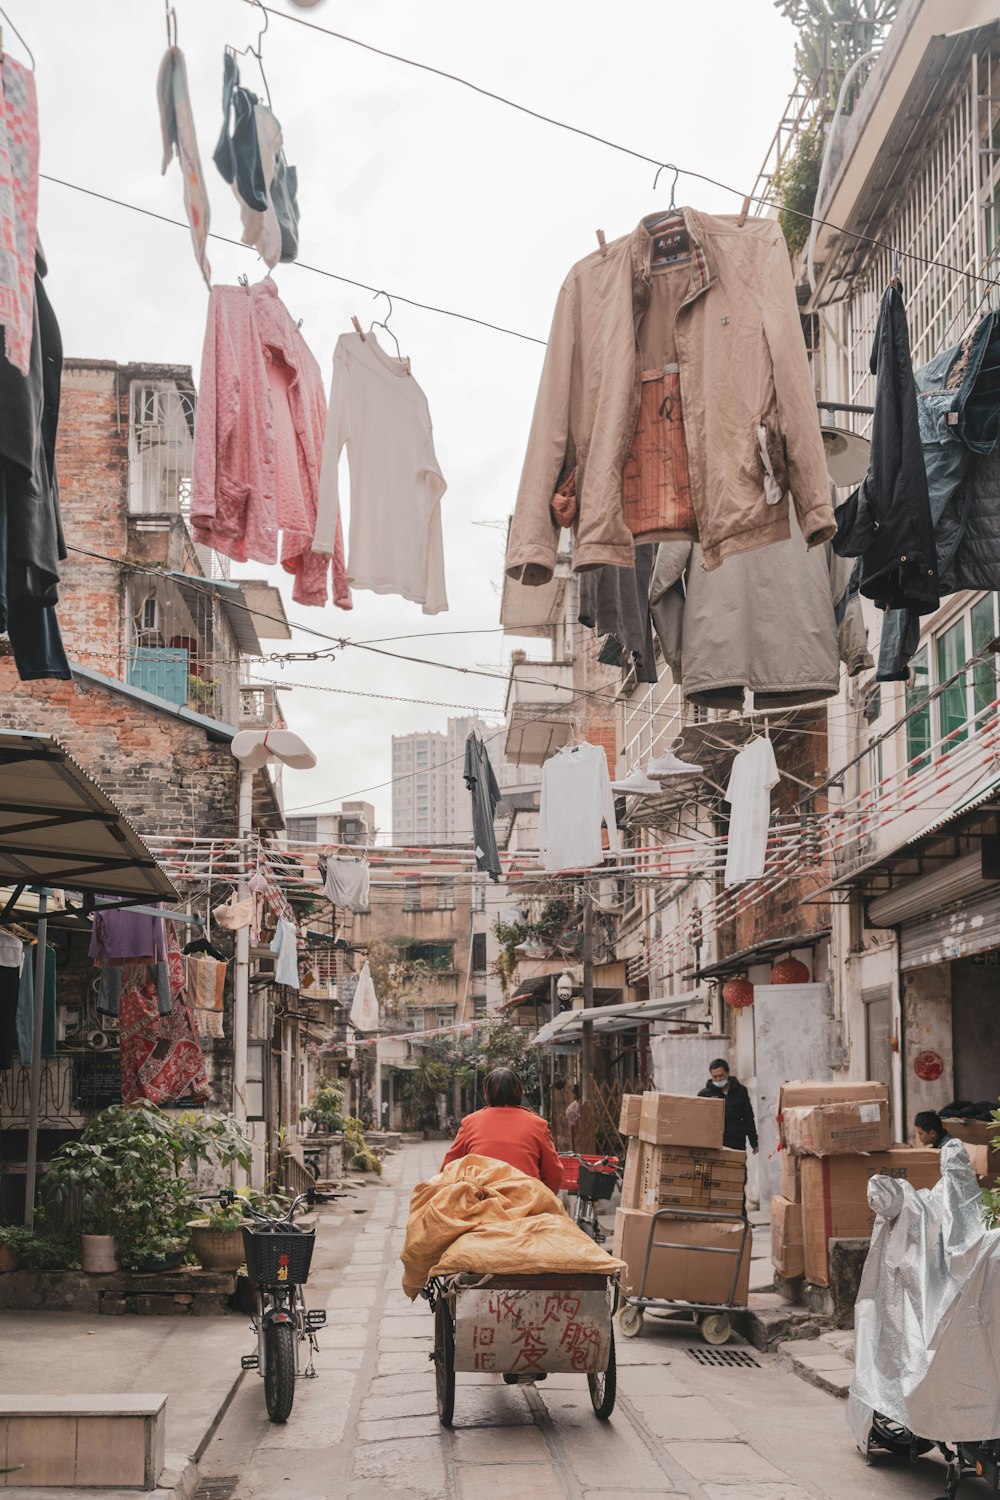 a street with clothes hanging on clothes lines